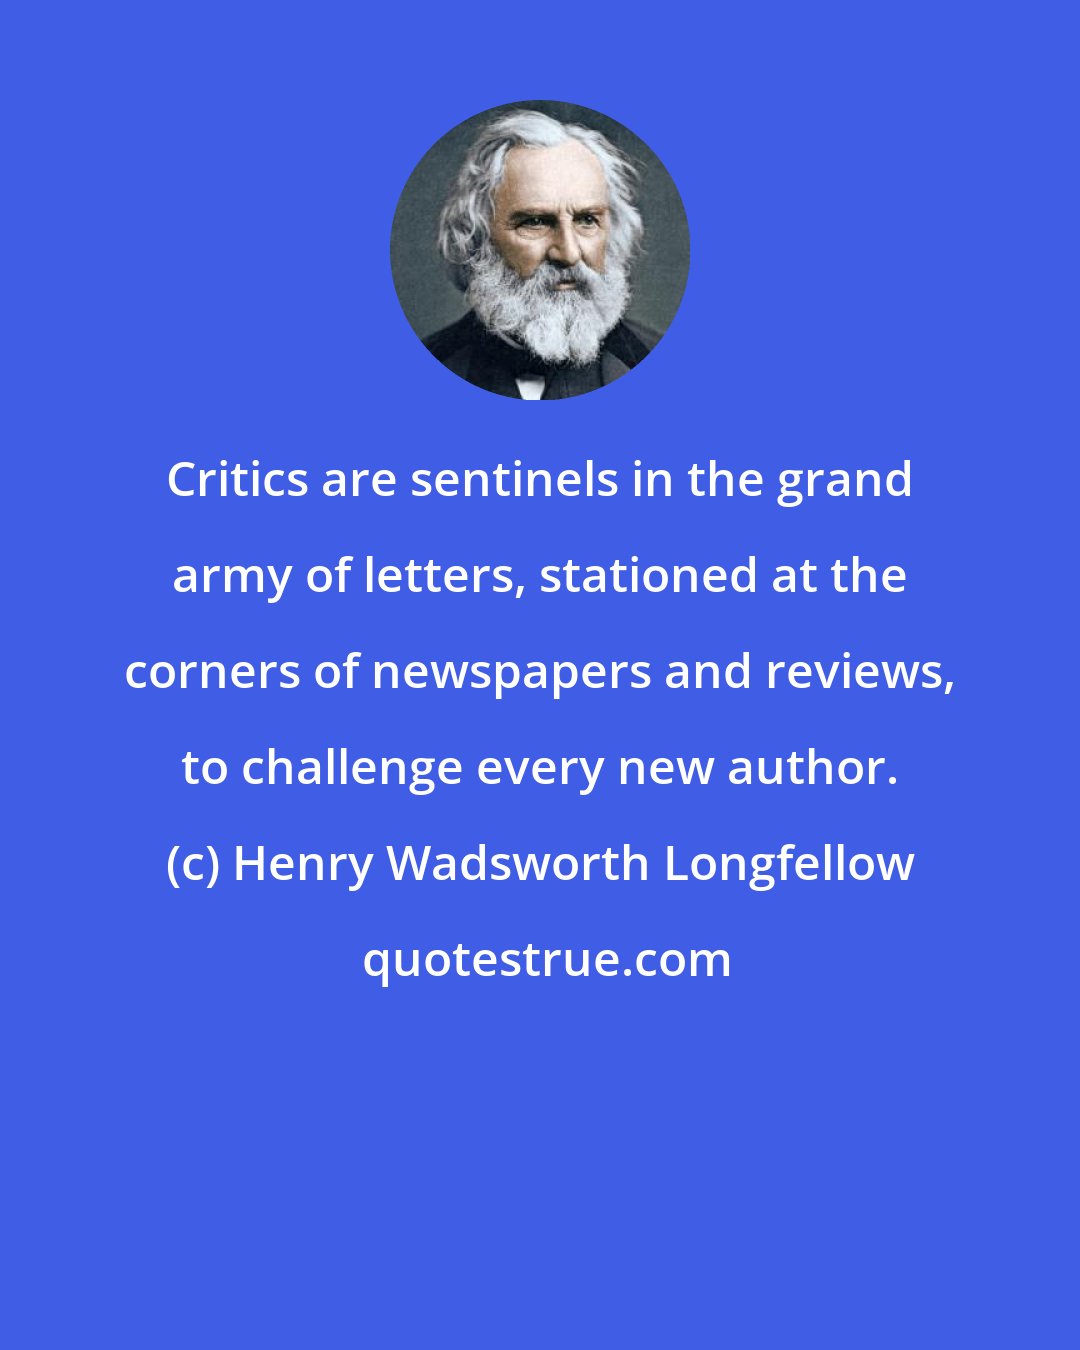 Henry Wadsworth Longfellow: Critics are sentinels in the grand army of letters, stationed at the corners of newspapers and reviews, to challenge every new author.